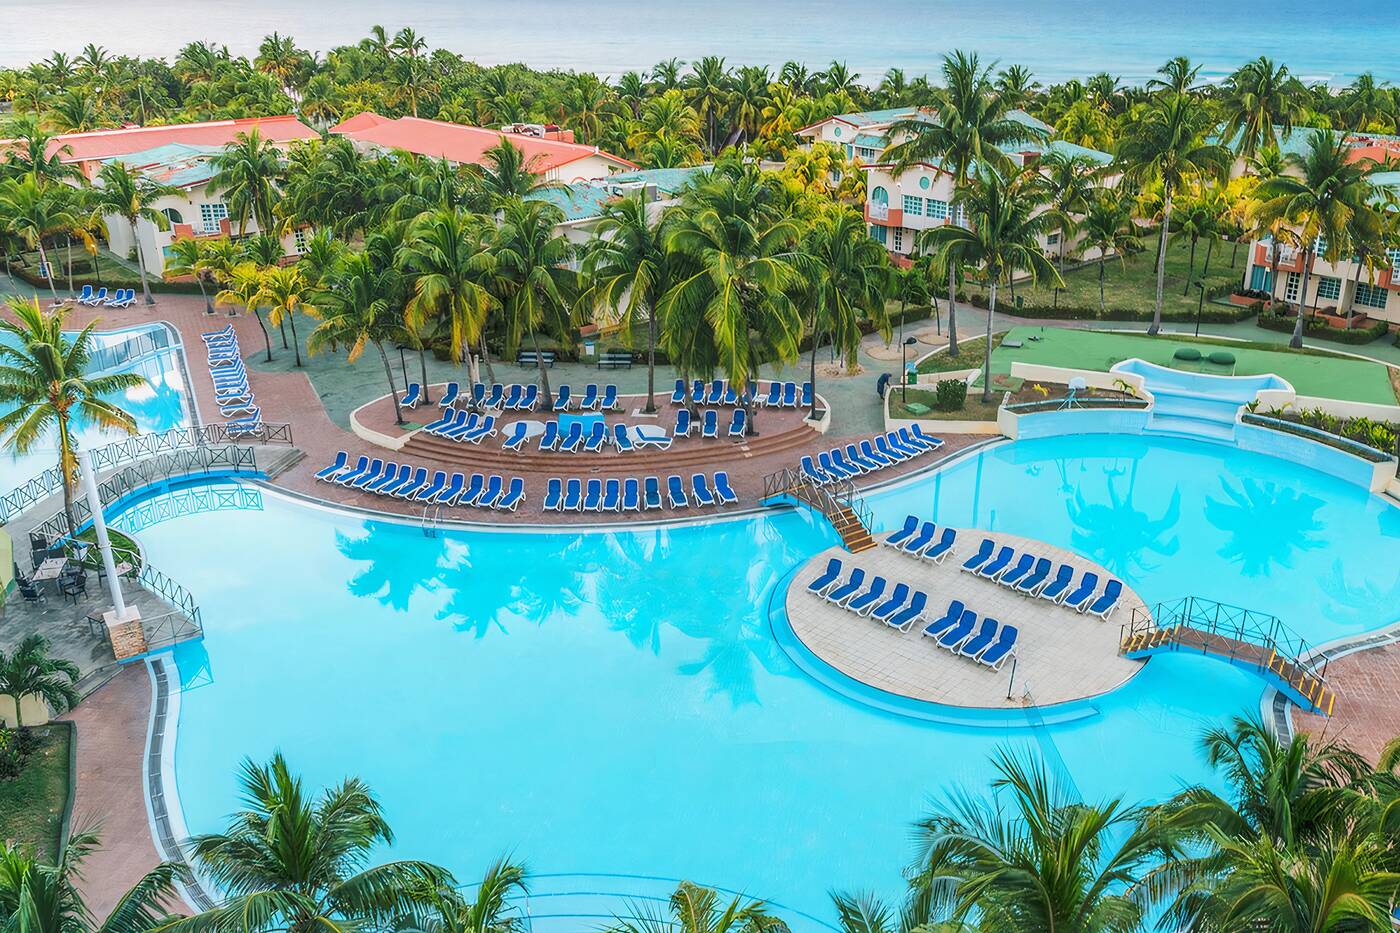 Cheap allinclusive vacations from Toronto you can get for under 1,000